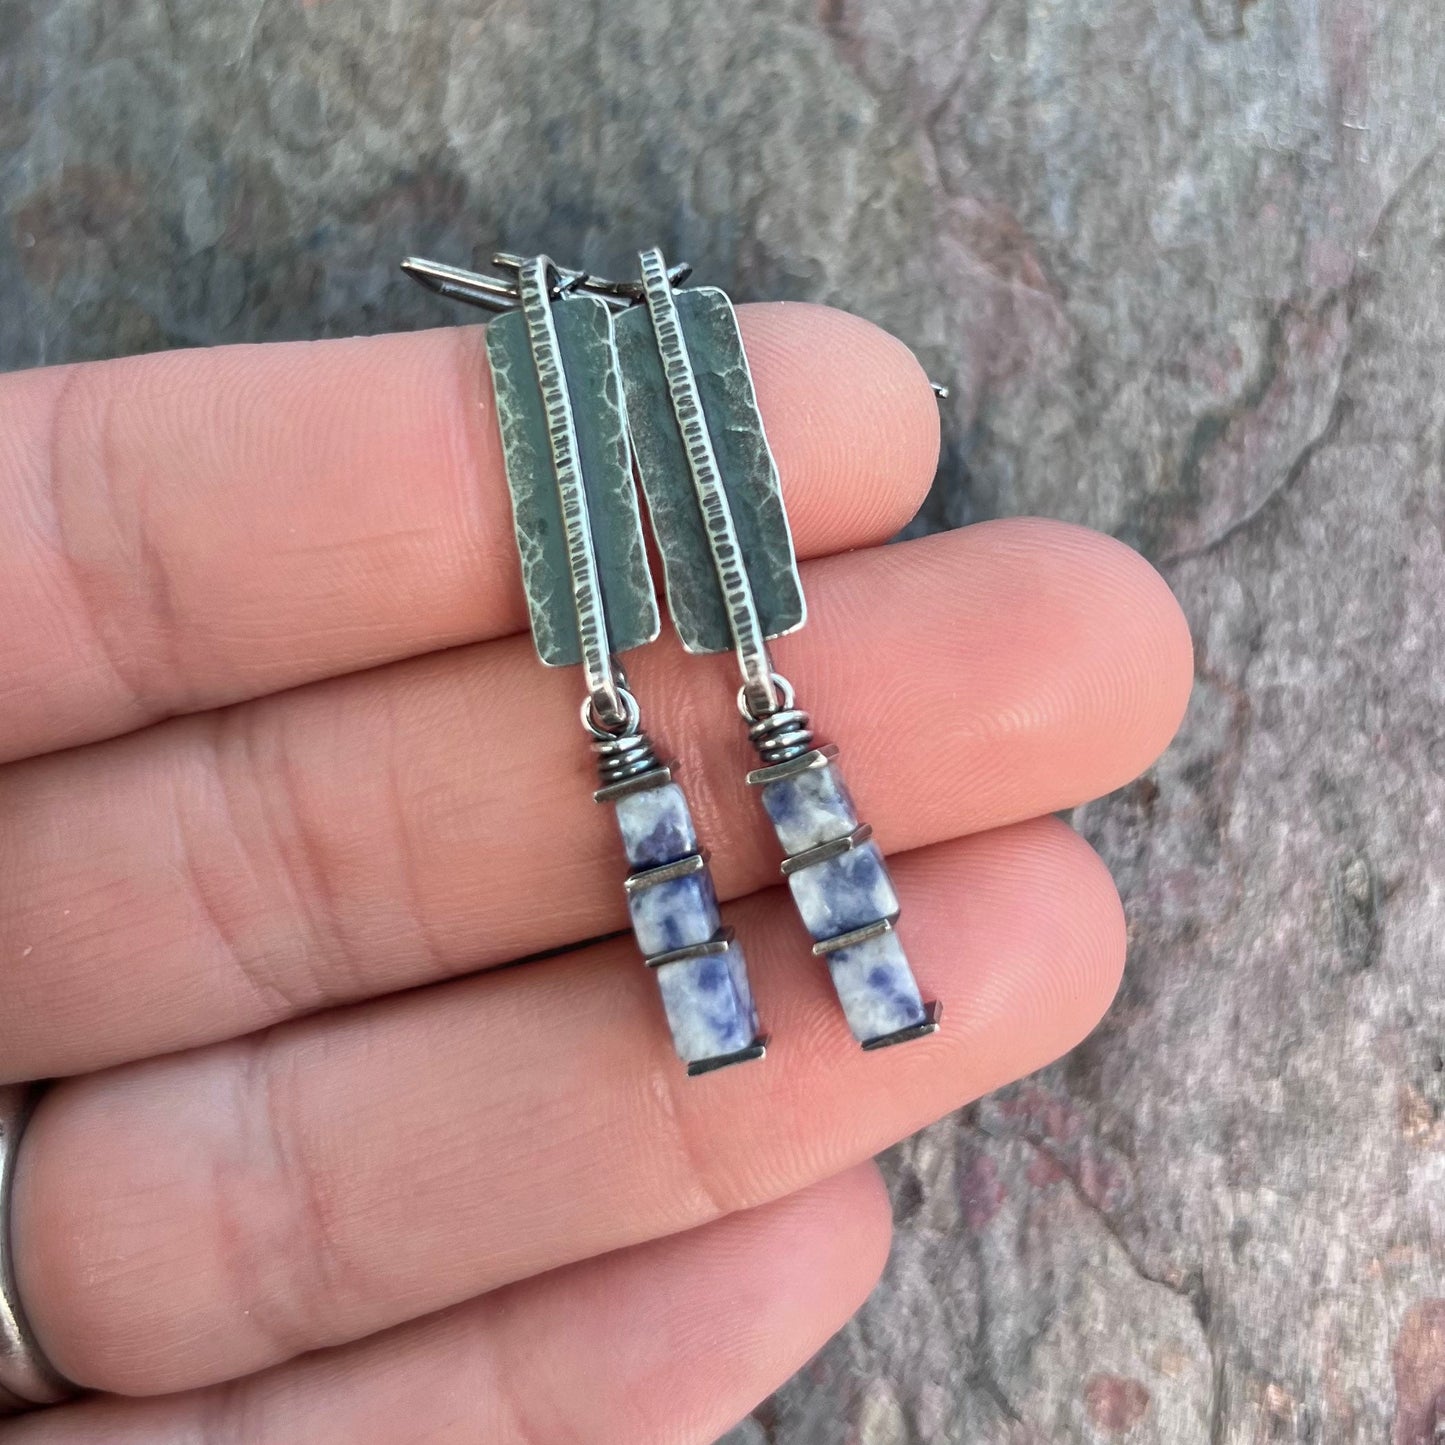 Lapis Lazuli Sterling Silver Earrings - Lapis Lazuli Cubes on Hammered Sterling Silver Rectangles